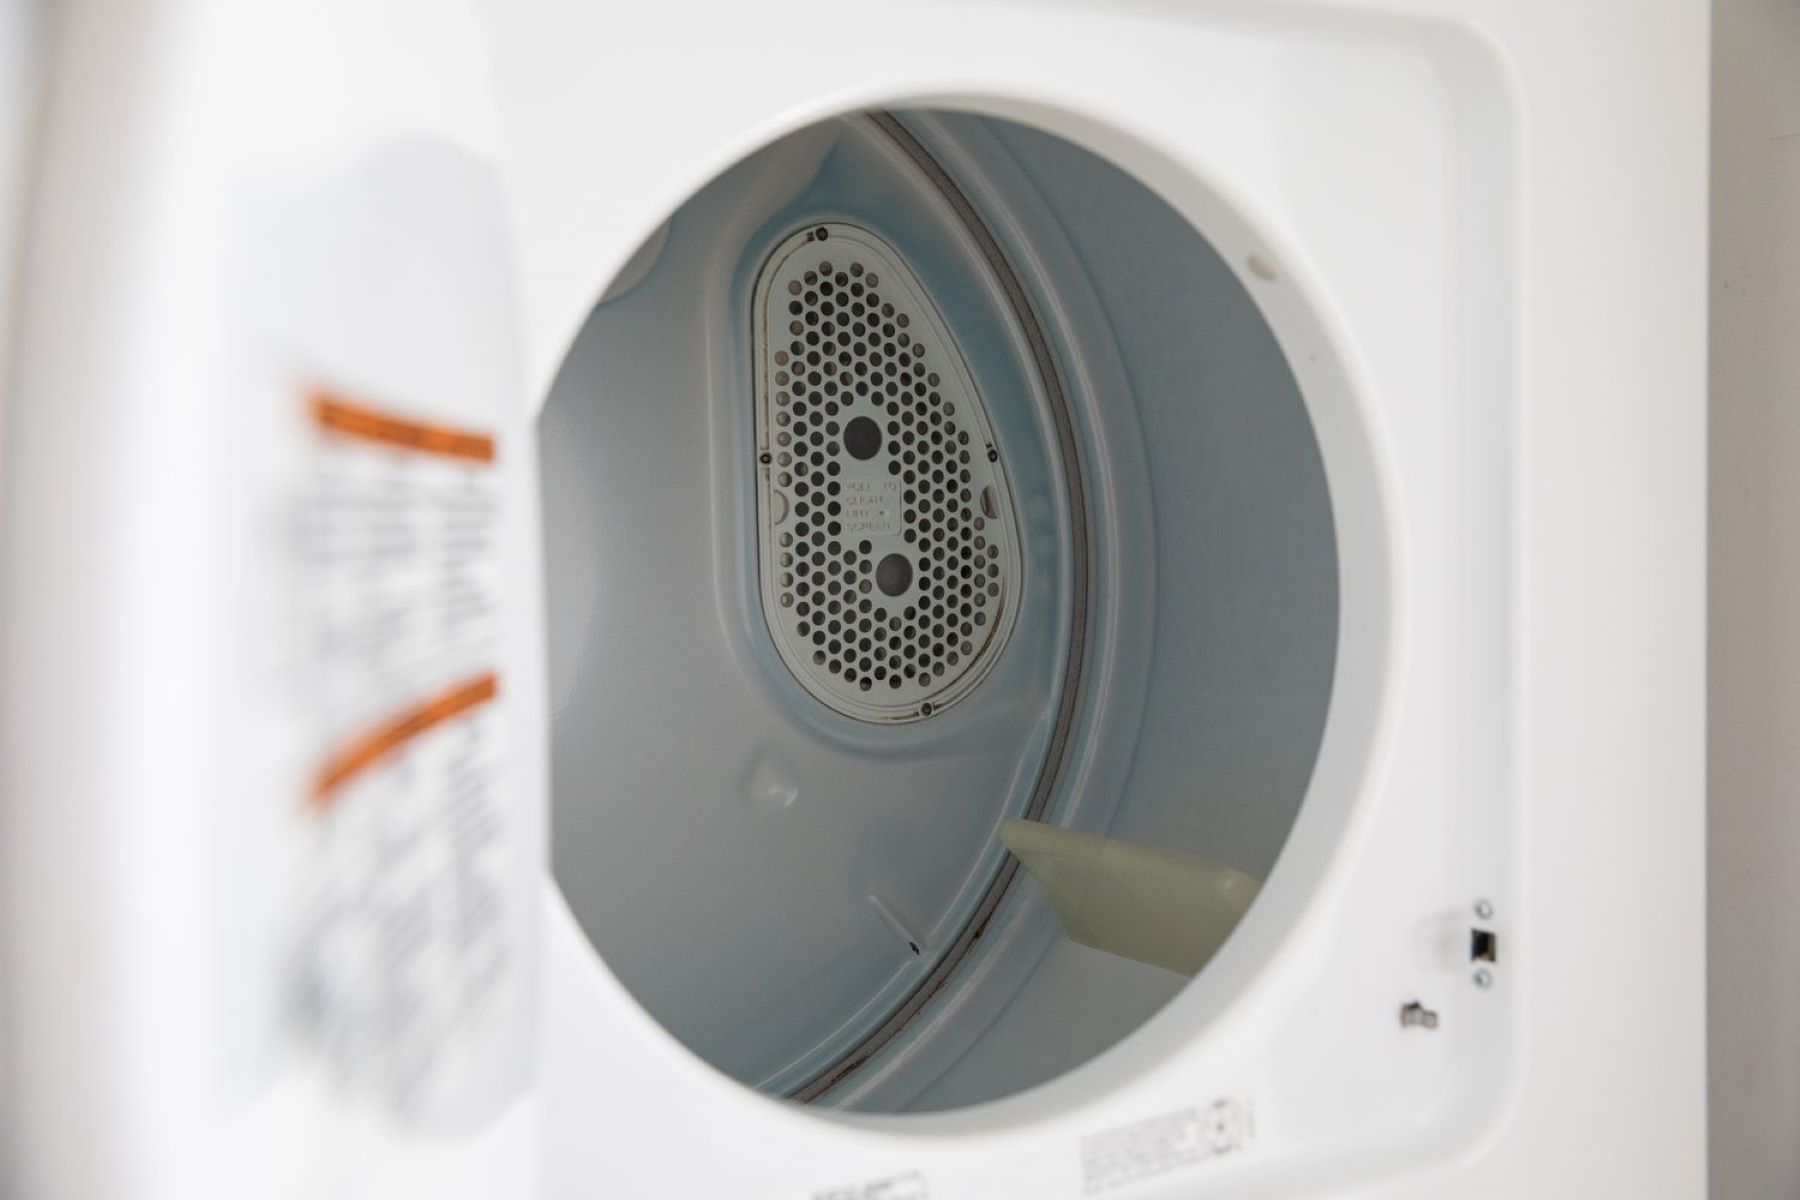 How To Fix The Error Code F71 For Whirlpool Dryer